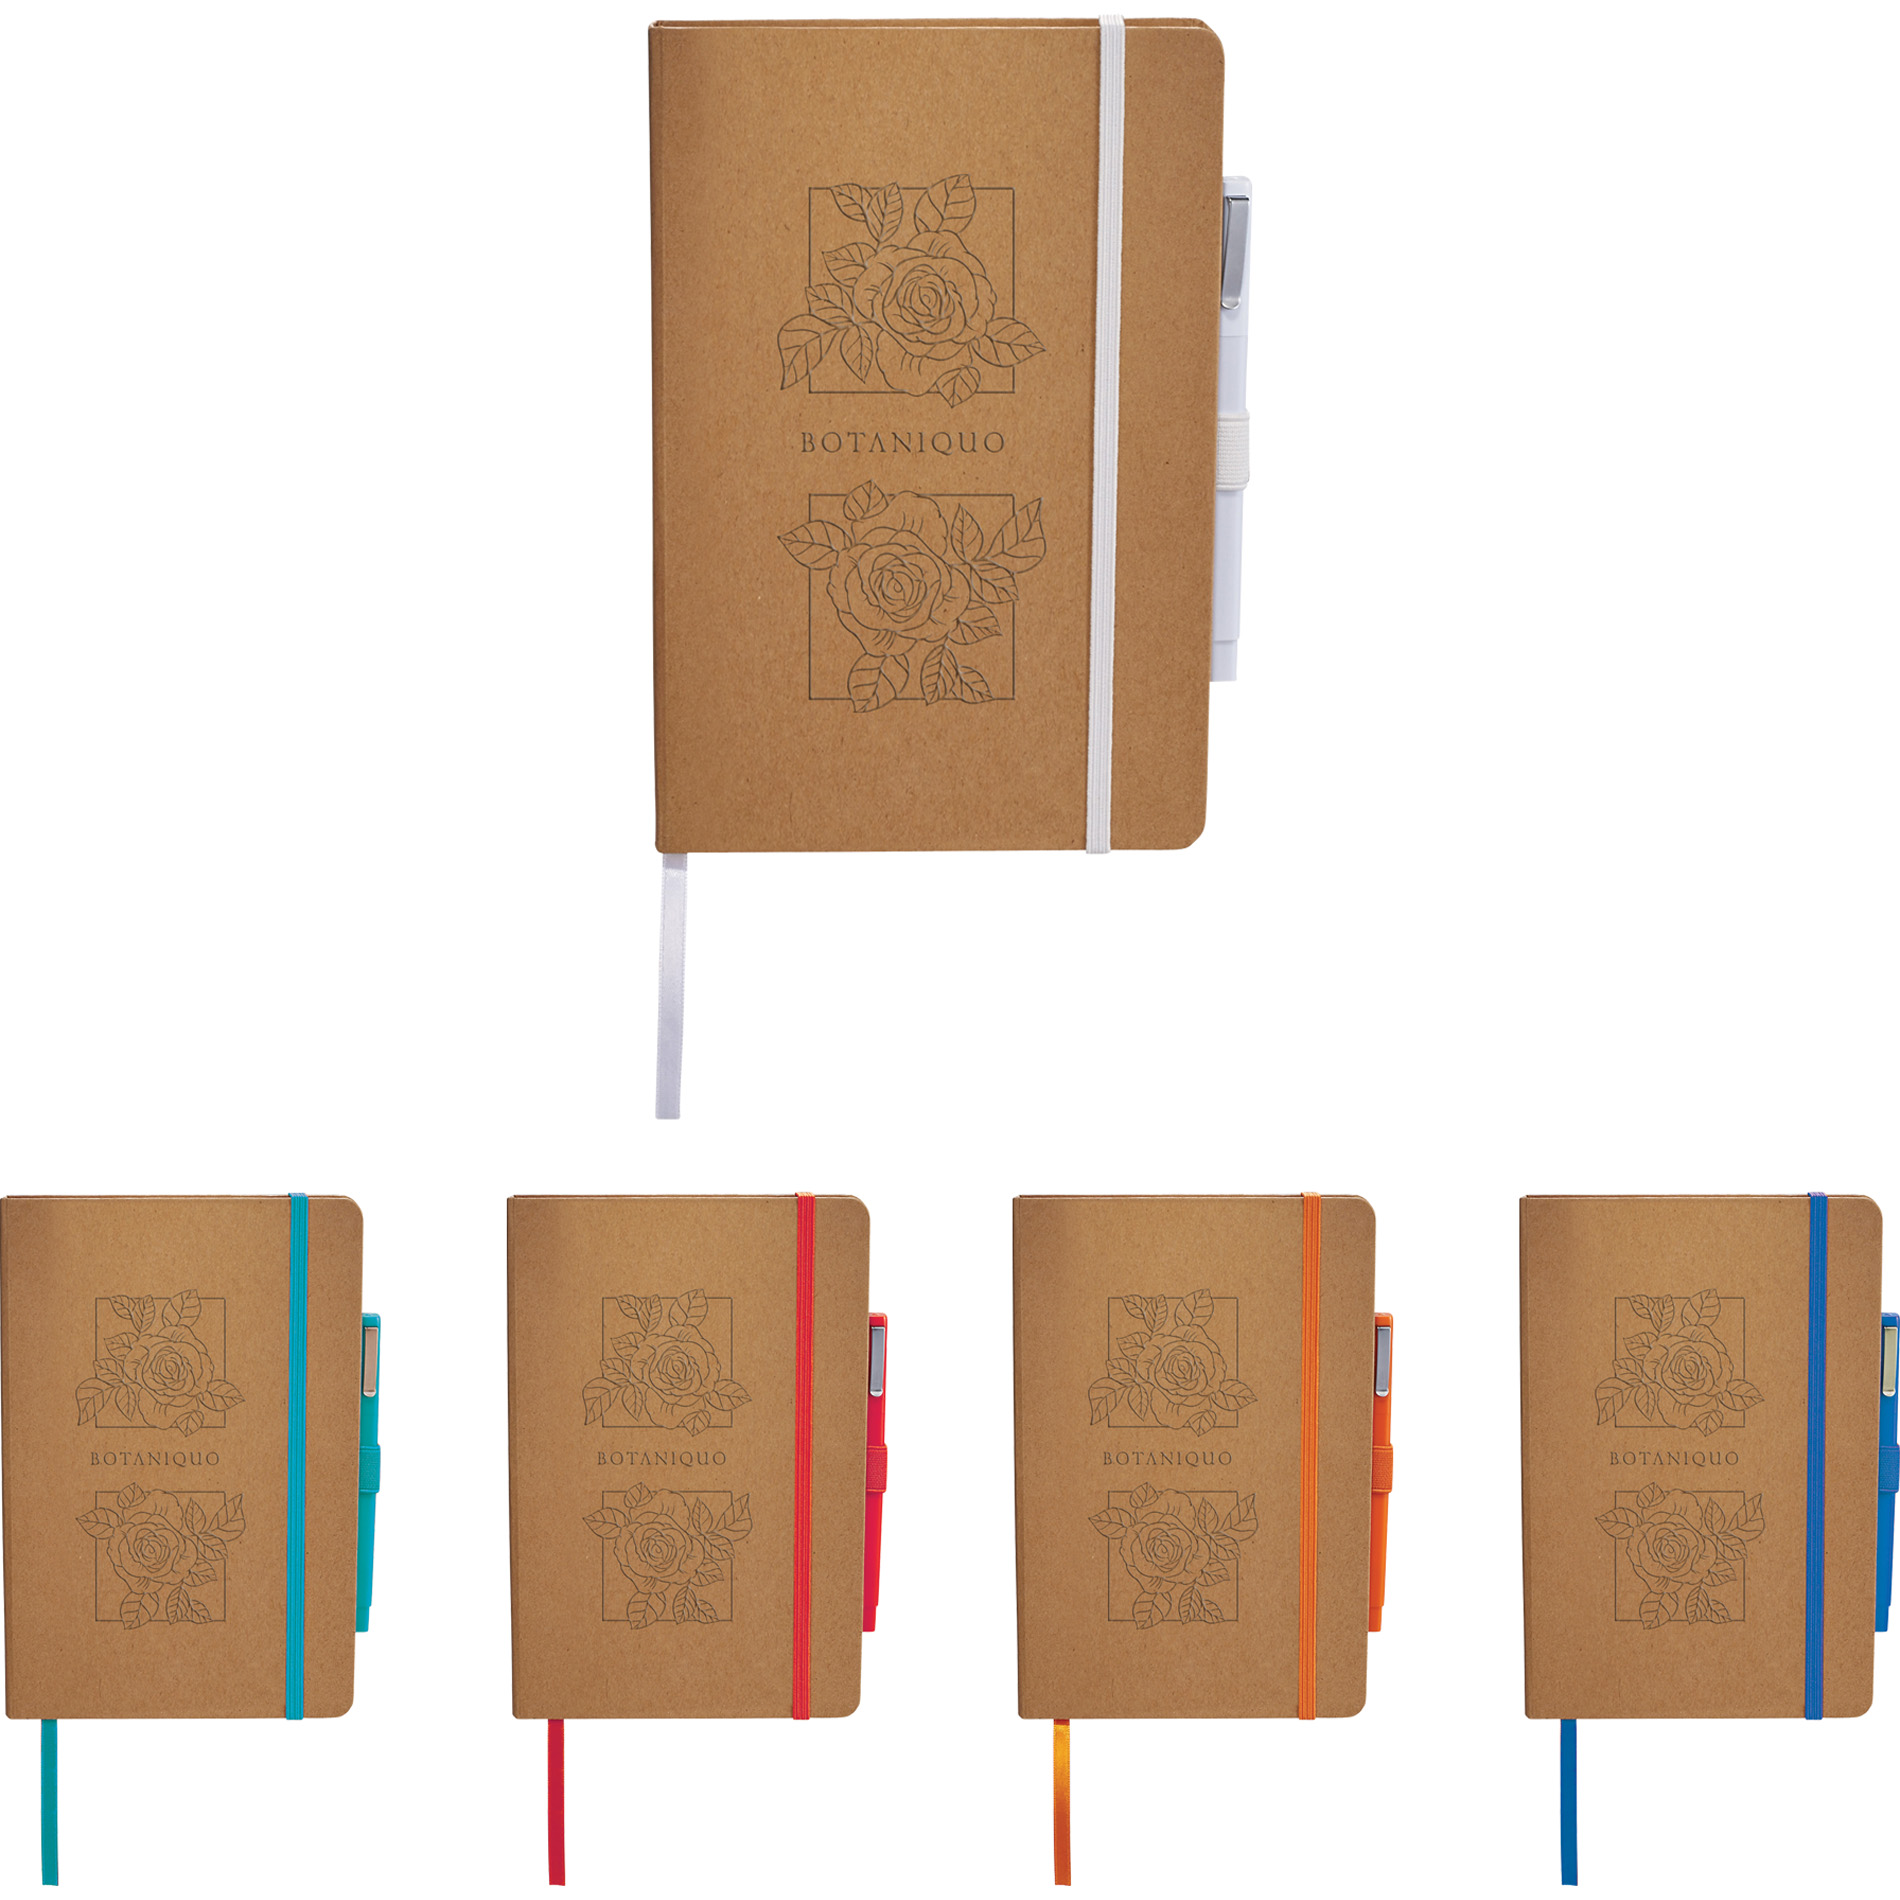 Recycled eco-friendly journal with colored accents and matching pen